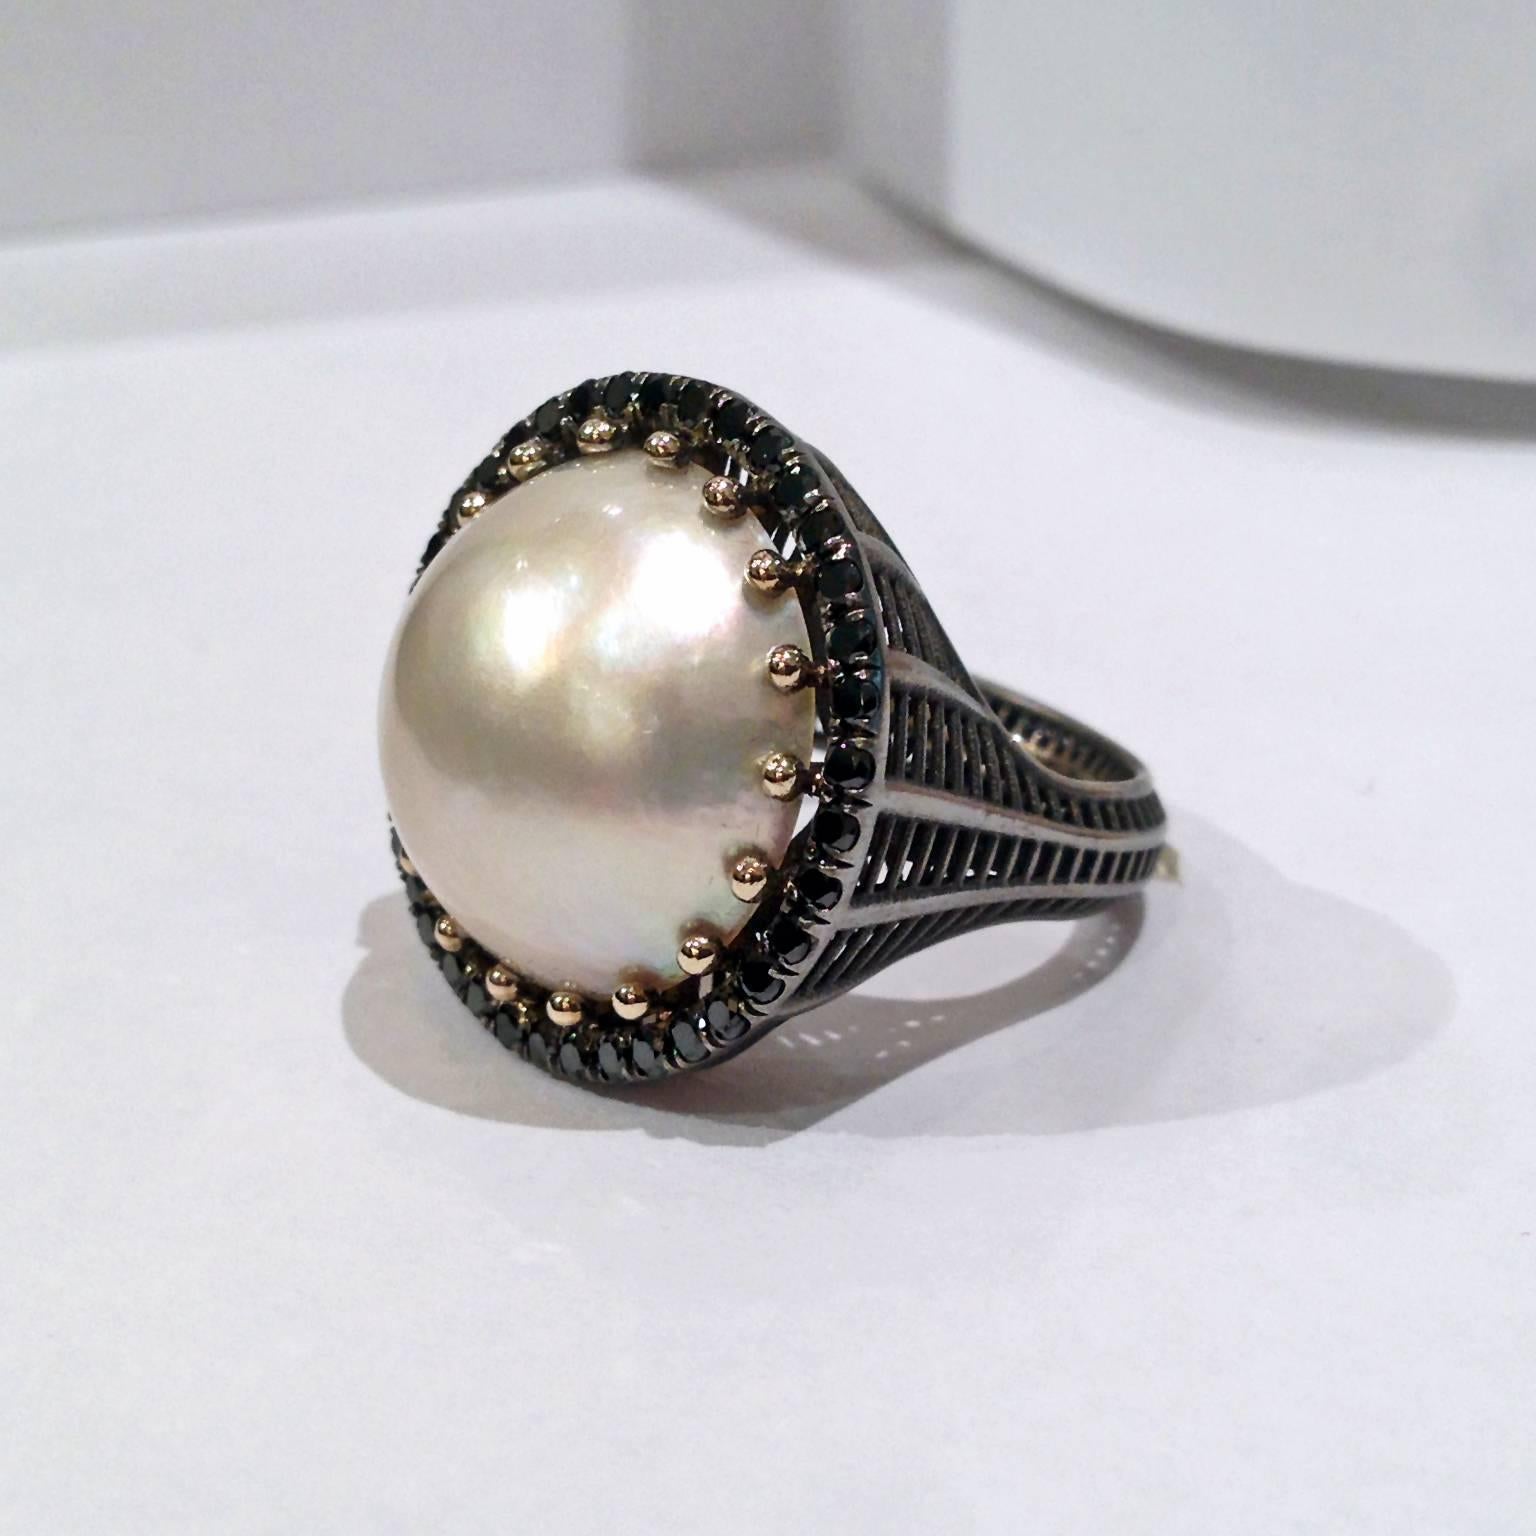 One-of-a-Kind Cabochon Cocktail Ring crafted in matte-finished 18k black gold with a lustrous, beautiful orient ten carat Mabe pearl set with shiny 18k yellow gold ball prongs and surrounded with 0.40 total carats of black diamonds. Size 7.0. 